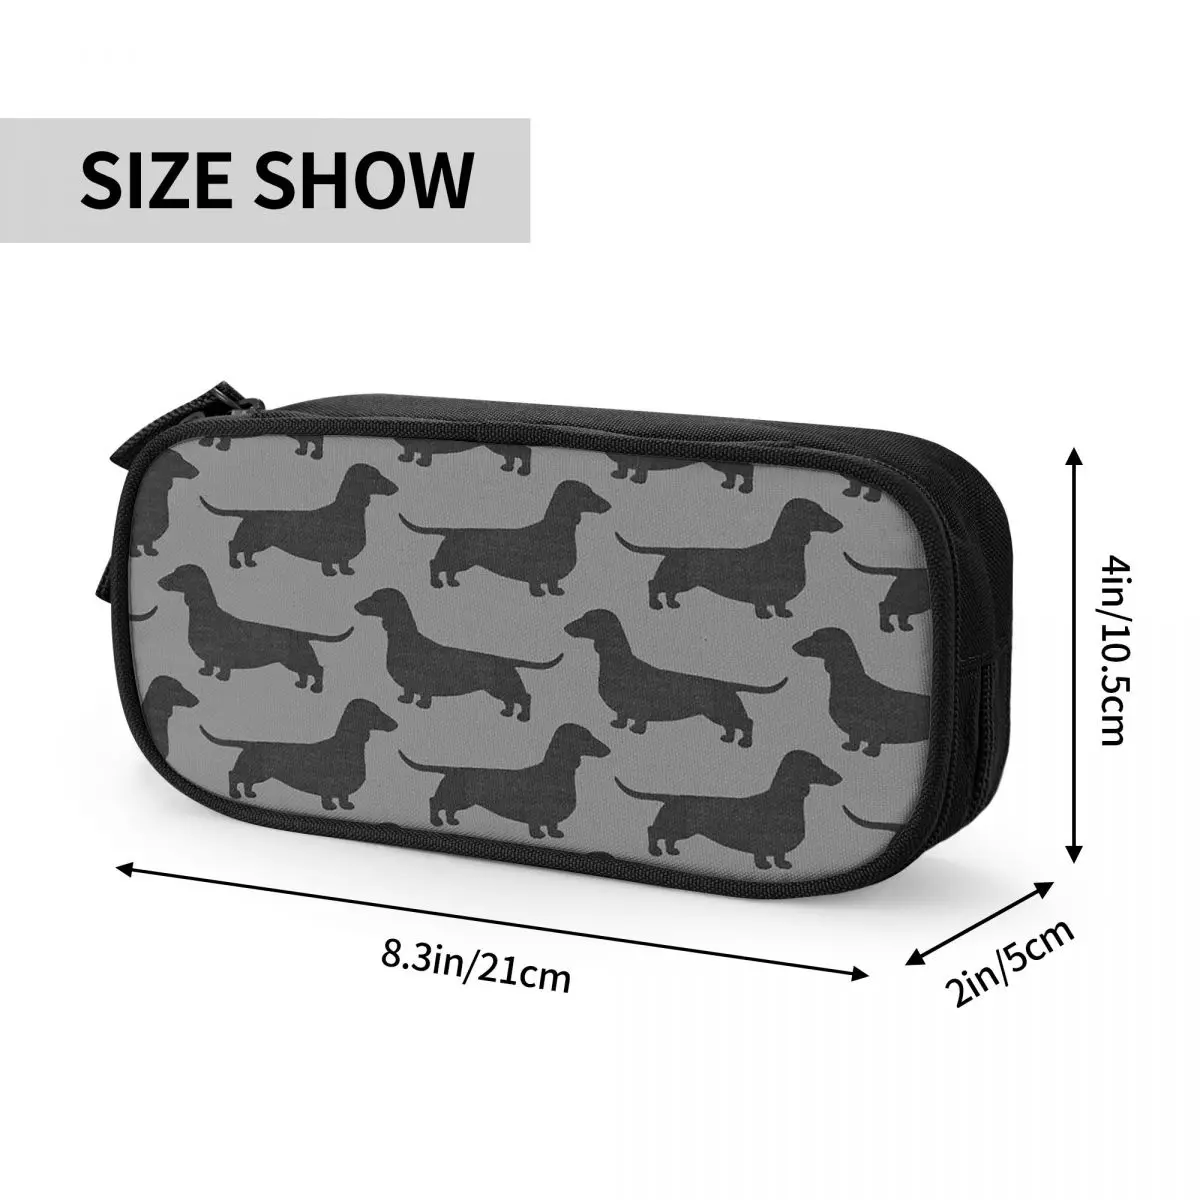 Dachshund Dog Silhouette Pencil Cases Wiener Sausage Doxie Pencilcases Pen Holder Big Capacity Bag Students School Stationery images - 6